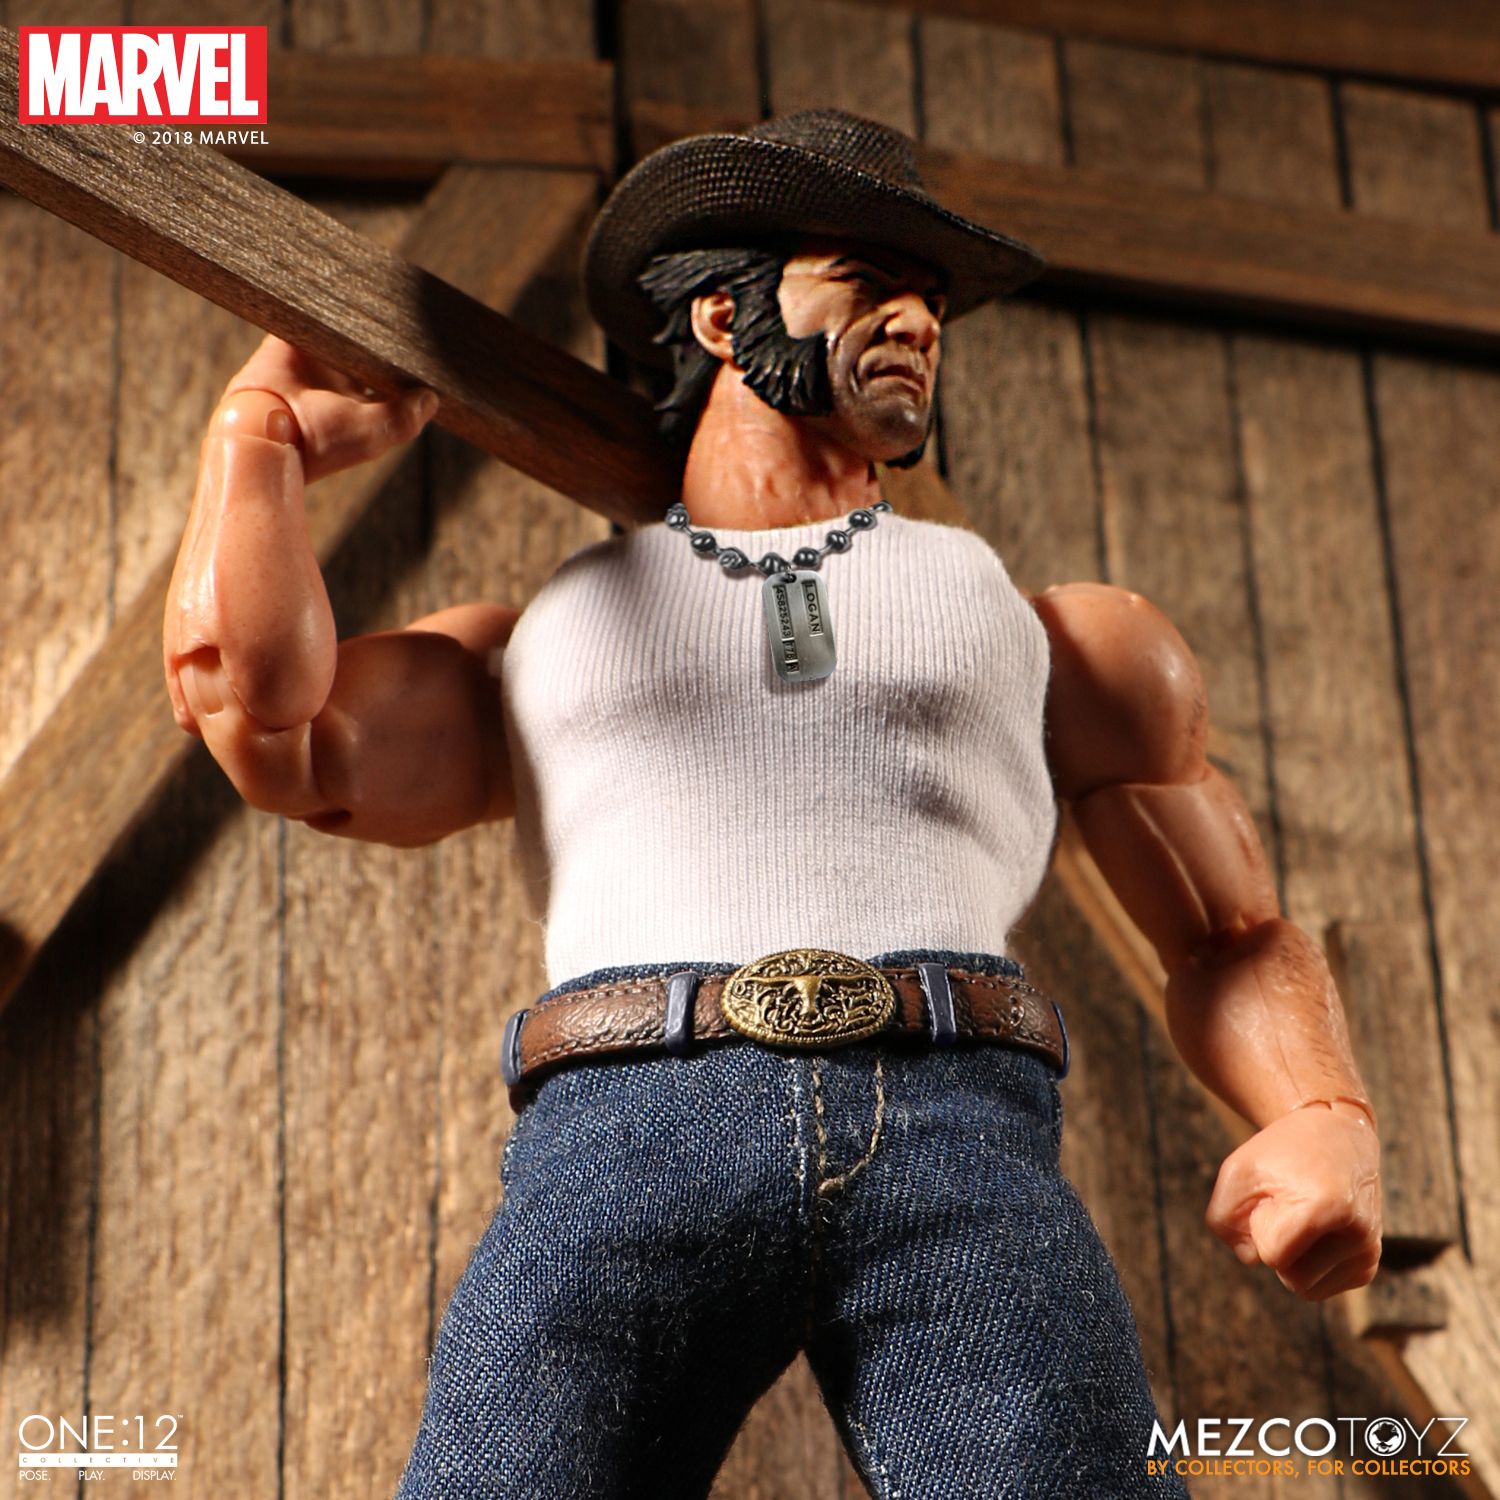 Mezco ONE:12 Collective Logan Figure Up for Order ...